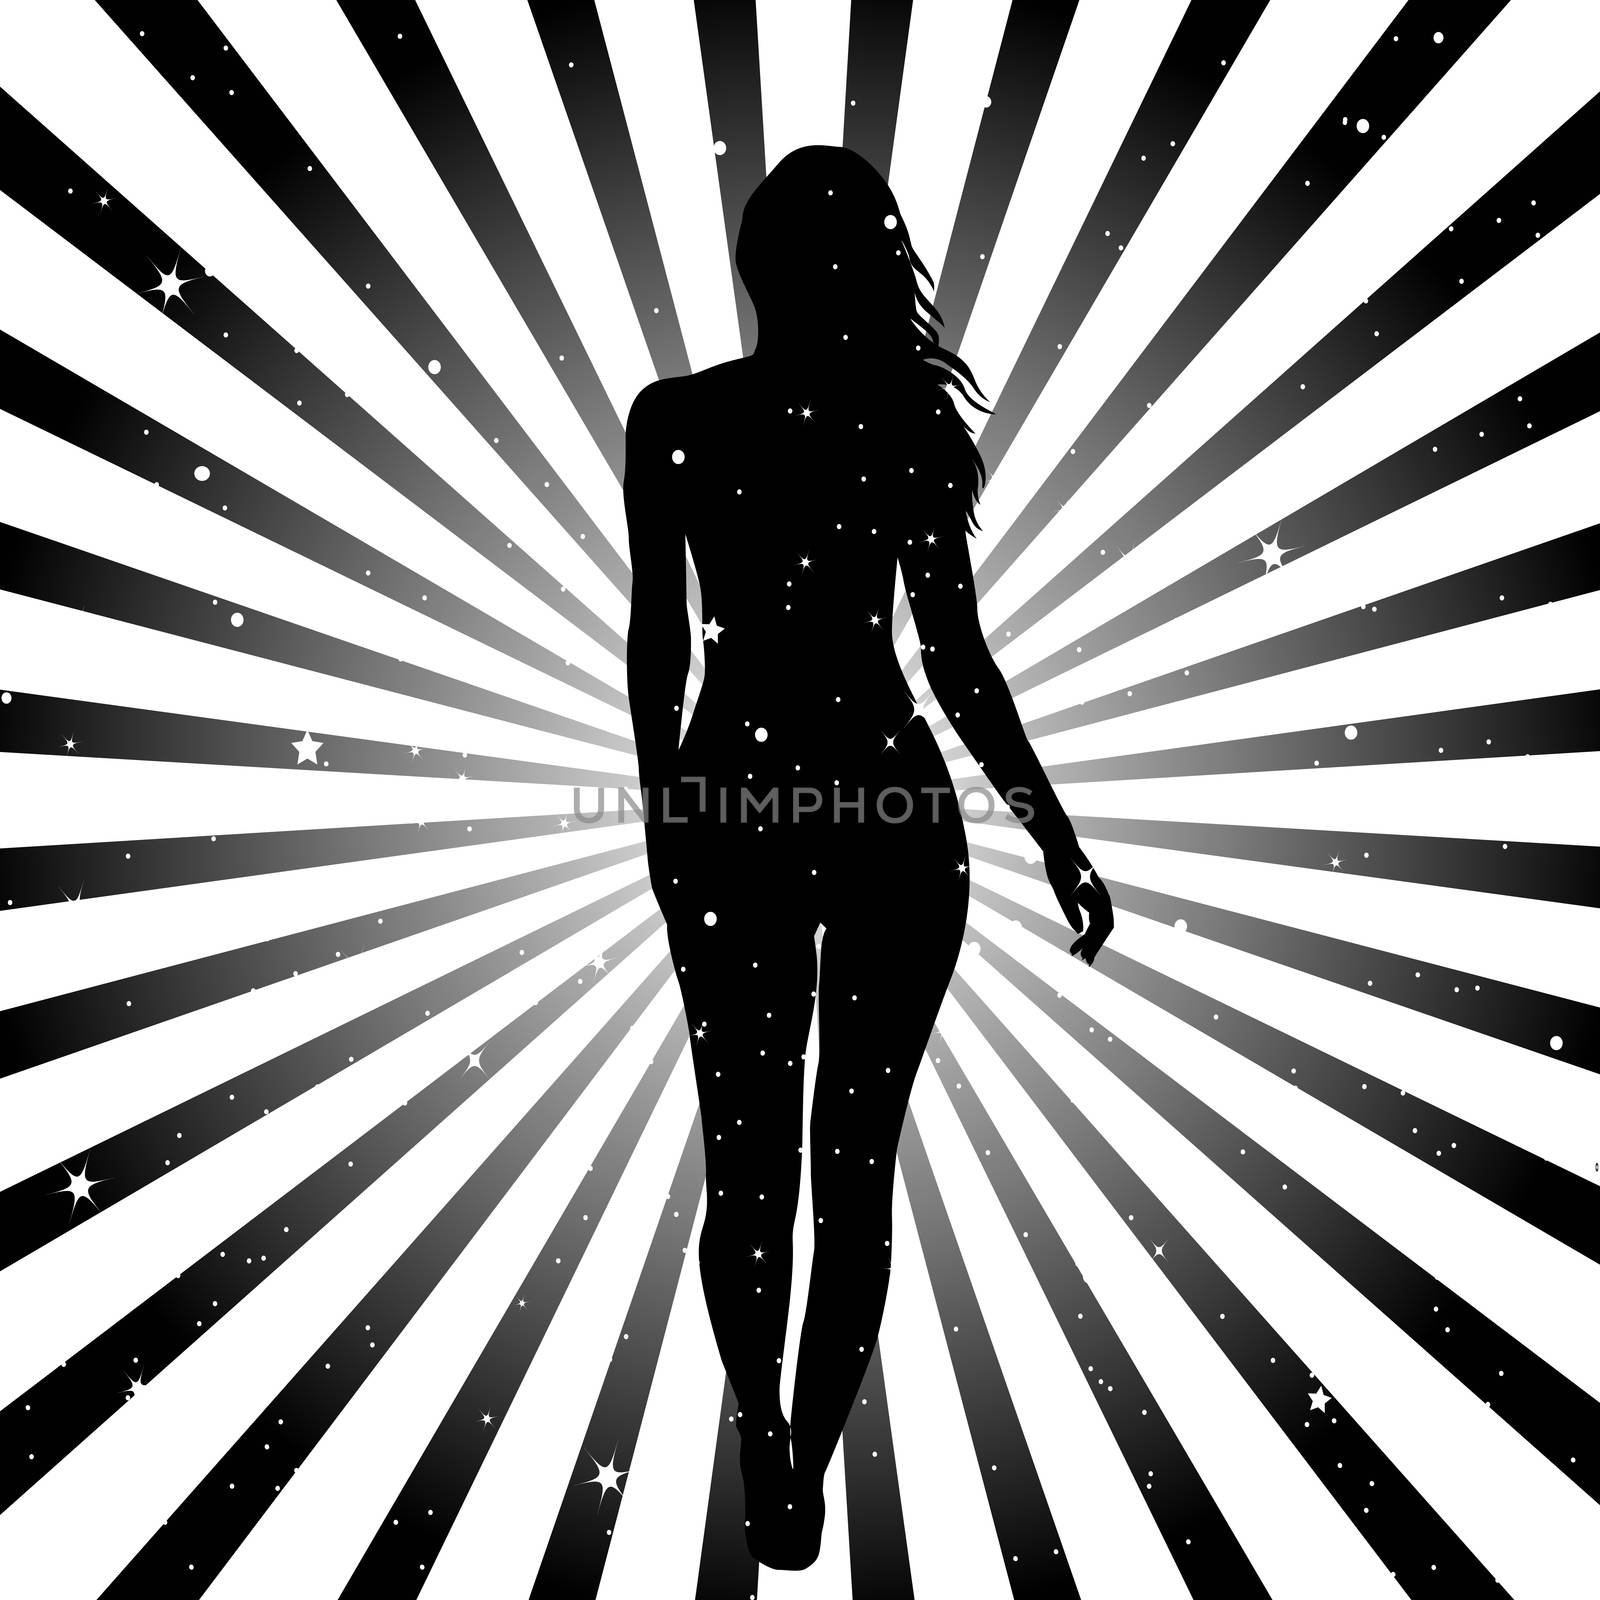 Sunburst with stars and woman silhouette by hibrida13